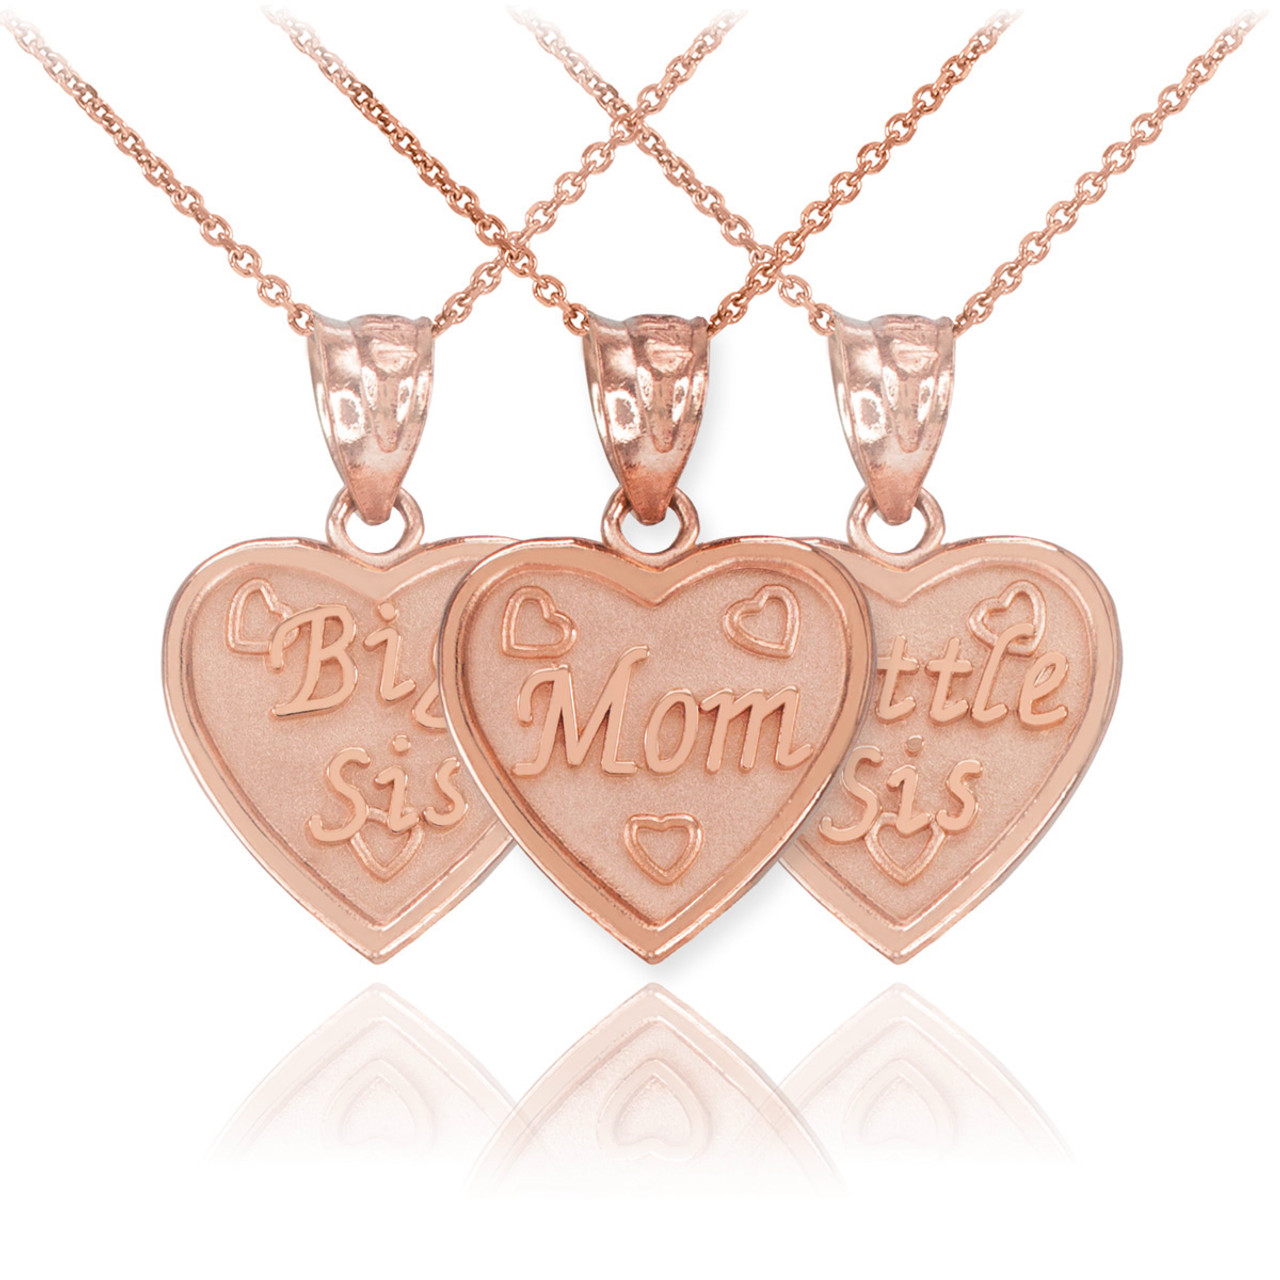 3 Pcs/set Heart Necklace Big Sis Mom Little Sis Carved Pendant For Mother's  Day Gifts Women Jewelry Charms Family Daughter - Necklace - AliExpress